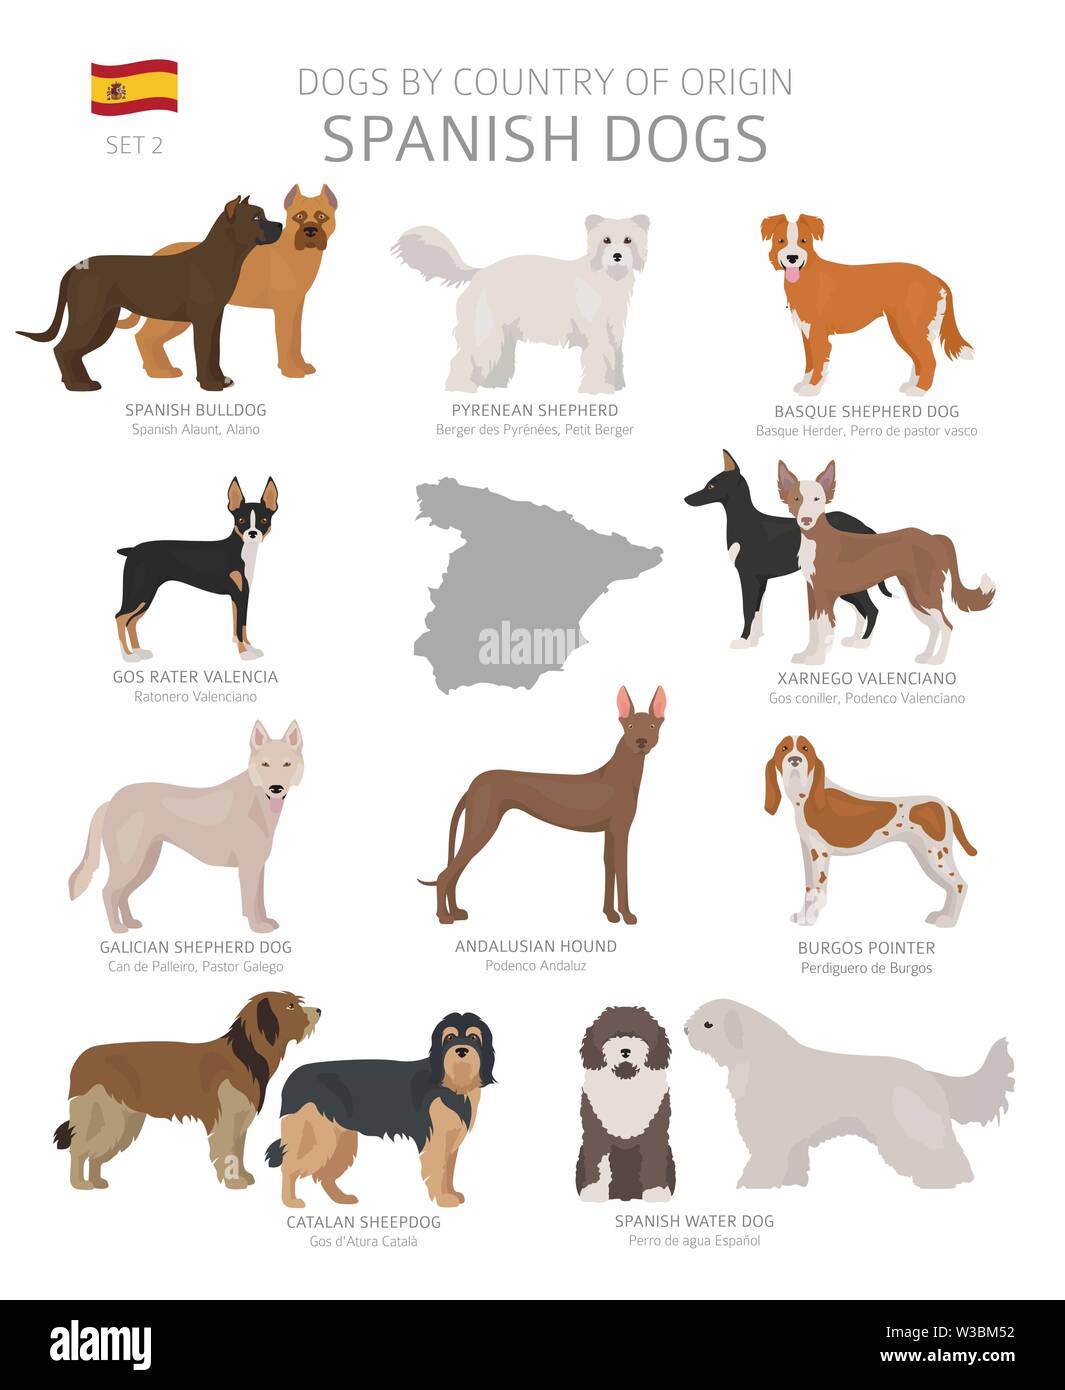 Dogs by country of origin. Spanish dog 